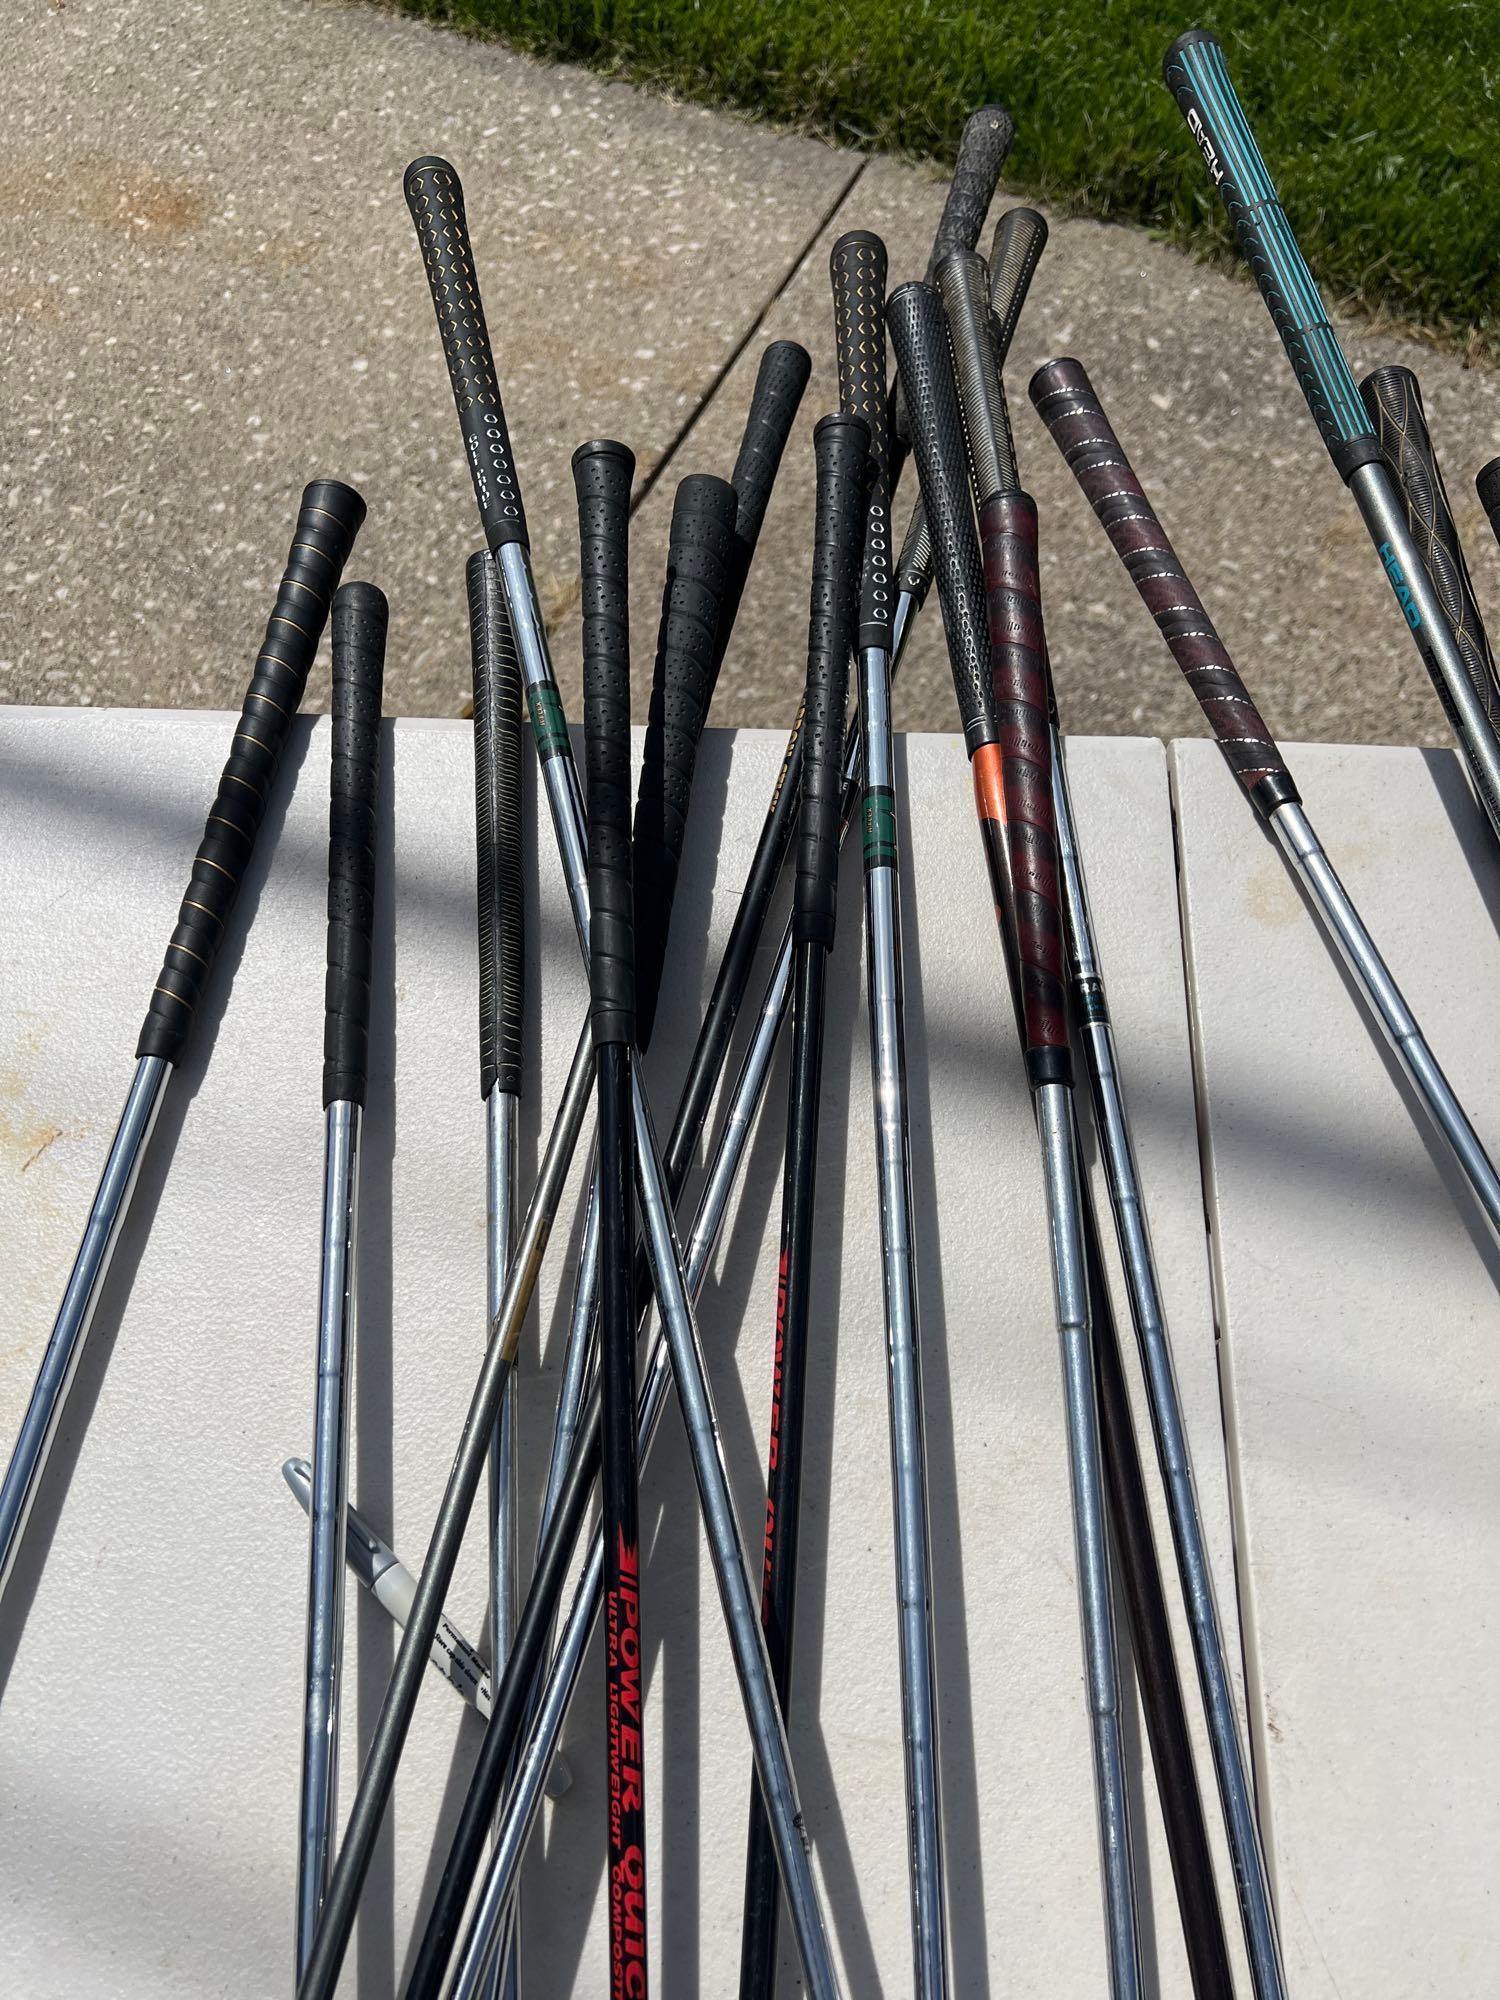 huge miscellaneous lot of golf clubs